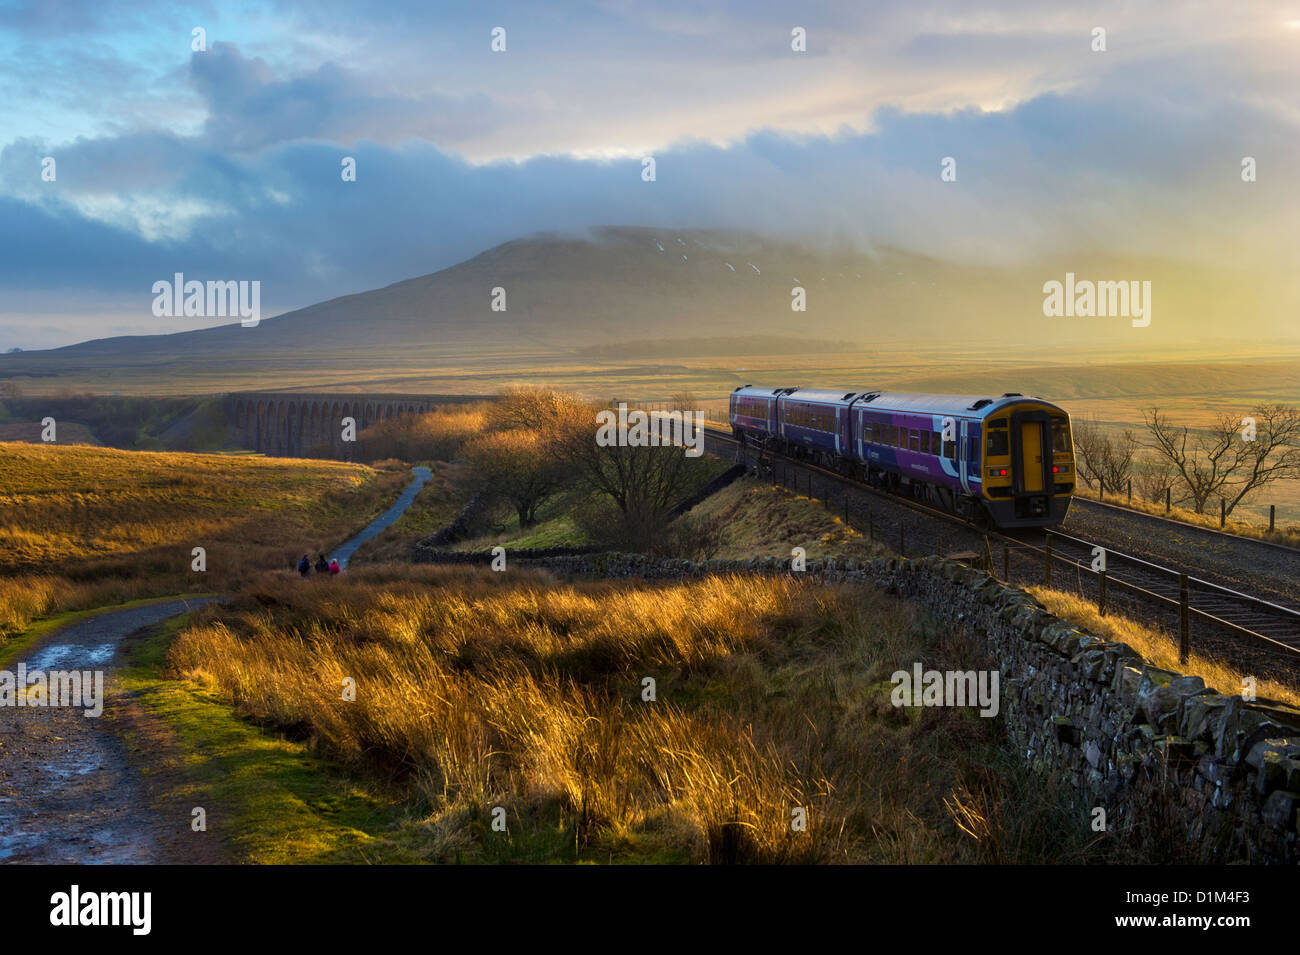 A Sprinter passenger train approaches Ribblehead Viaduct on the Settle to Carlisle Railway line, on a Winter afternoon, North Yorkshire UK. Stock Photo